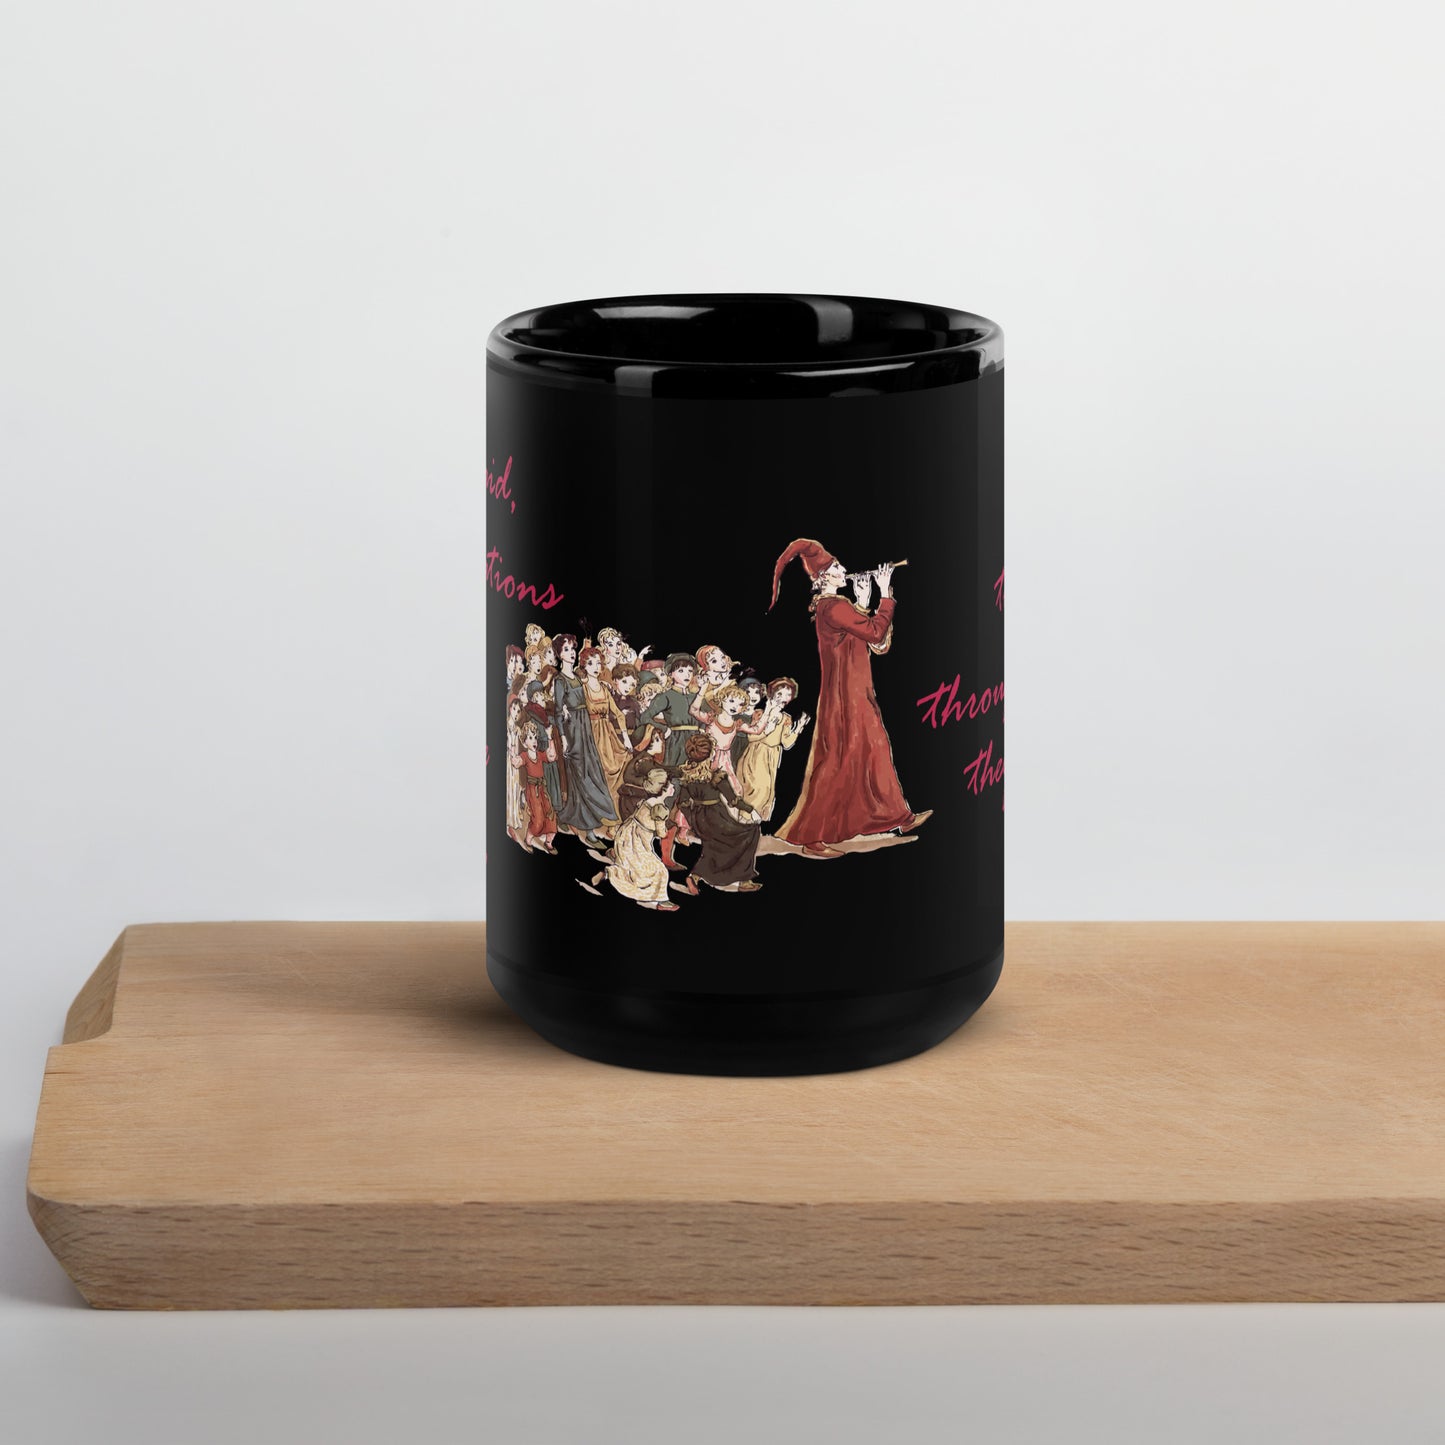 A007 Mug - Black Glossy Ceramic Mug Featuring Luke 17:1 With a Graphic Depiction of the Pied Piper Leading a Mesmerized Crowd.